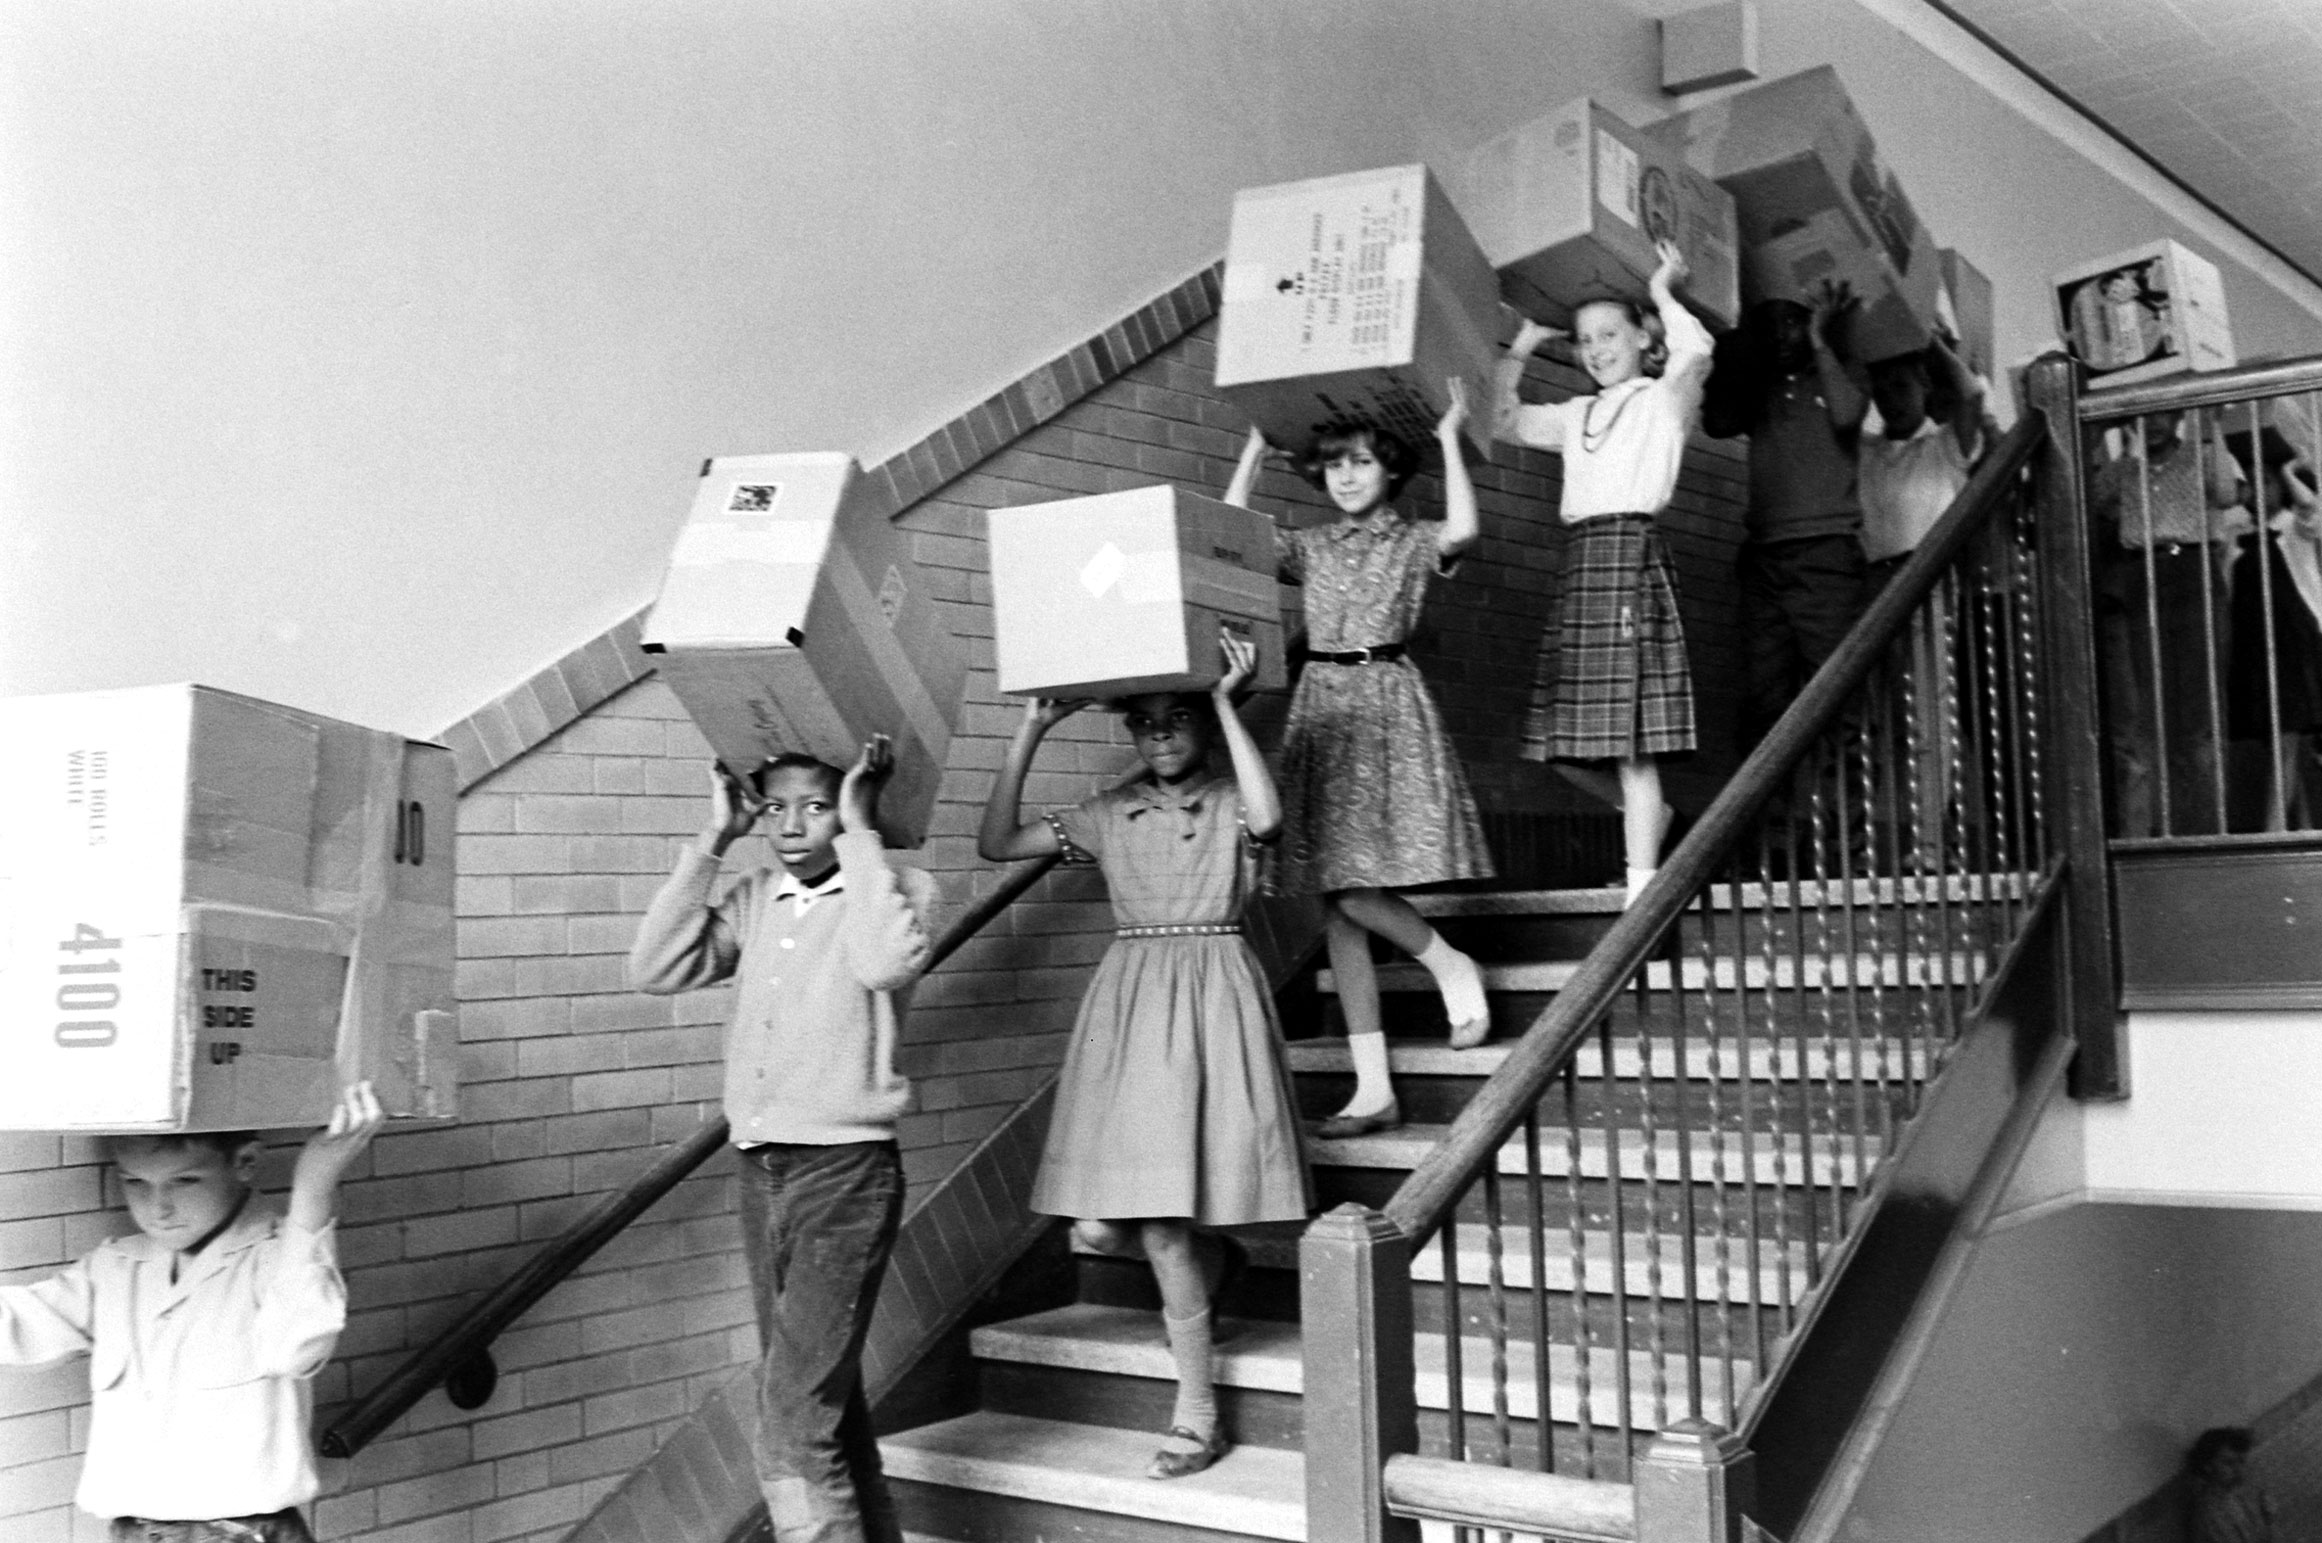 Children demonstrate how to watch a solar eclipse in 1963